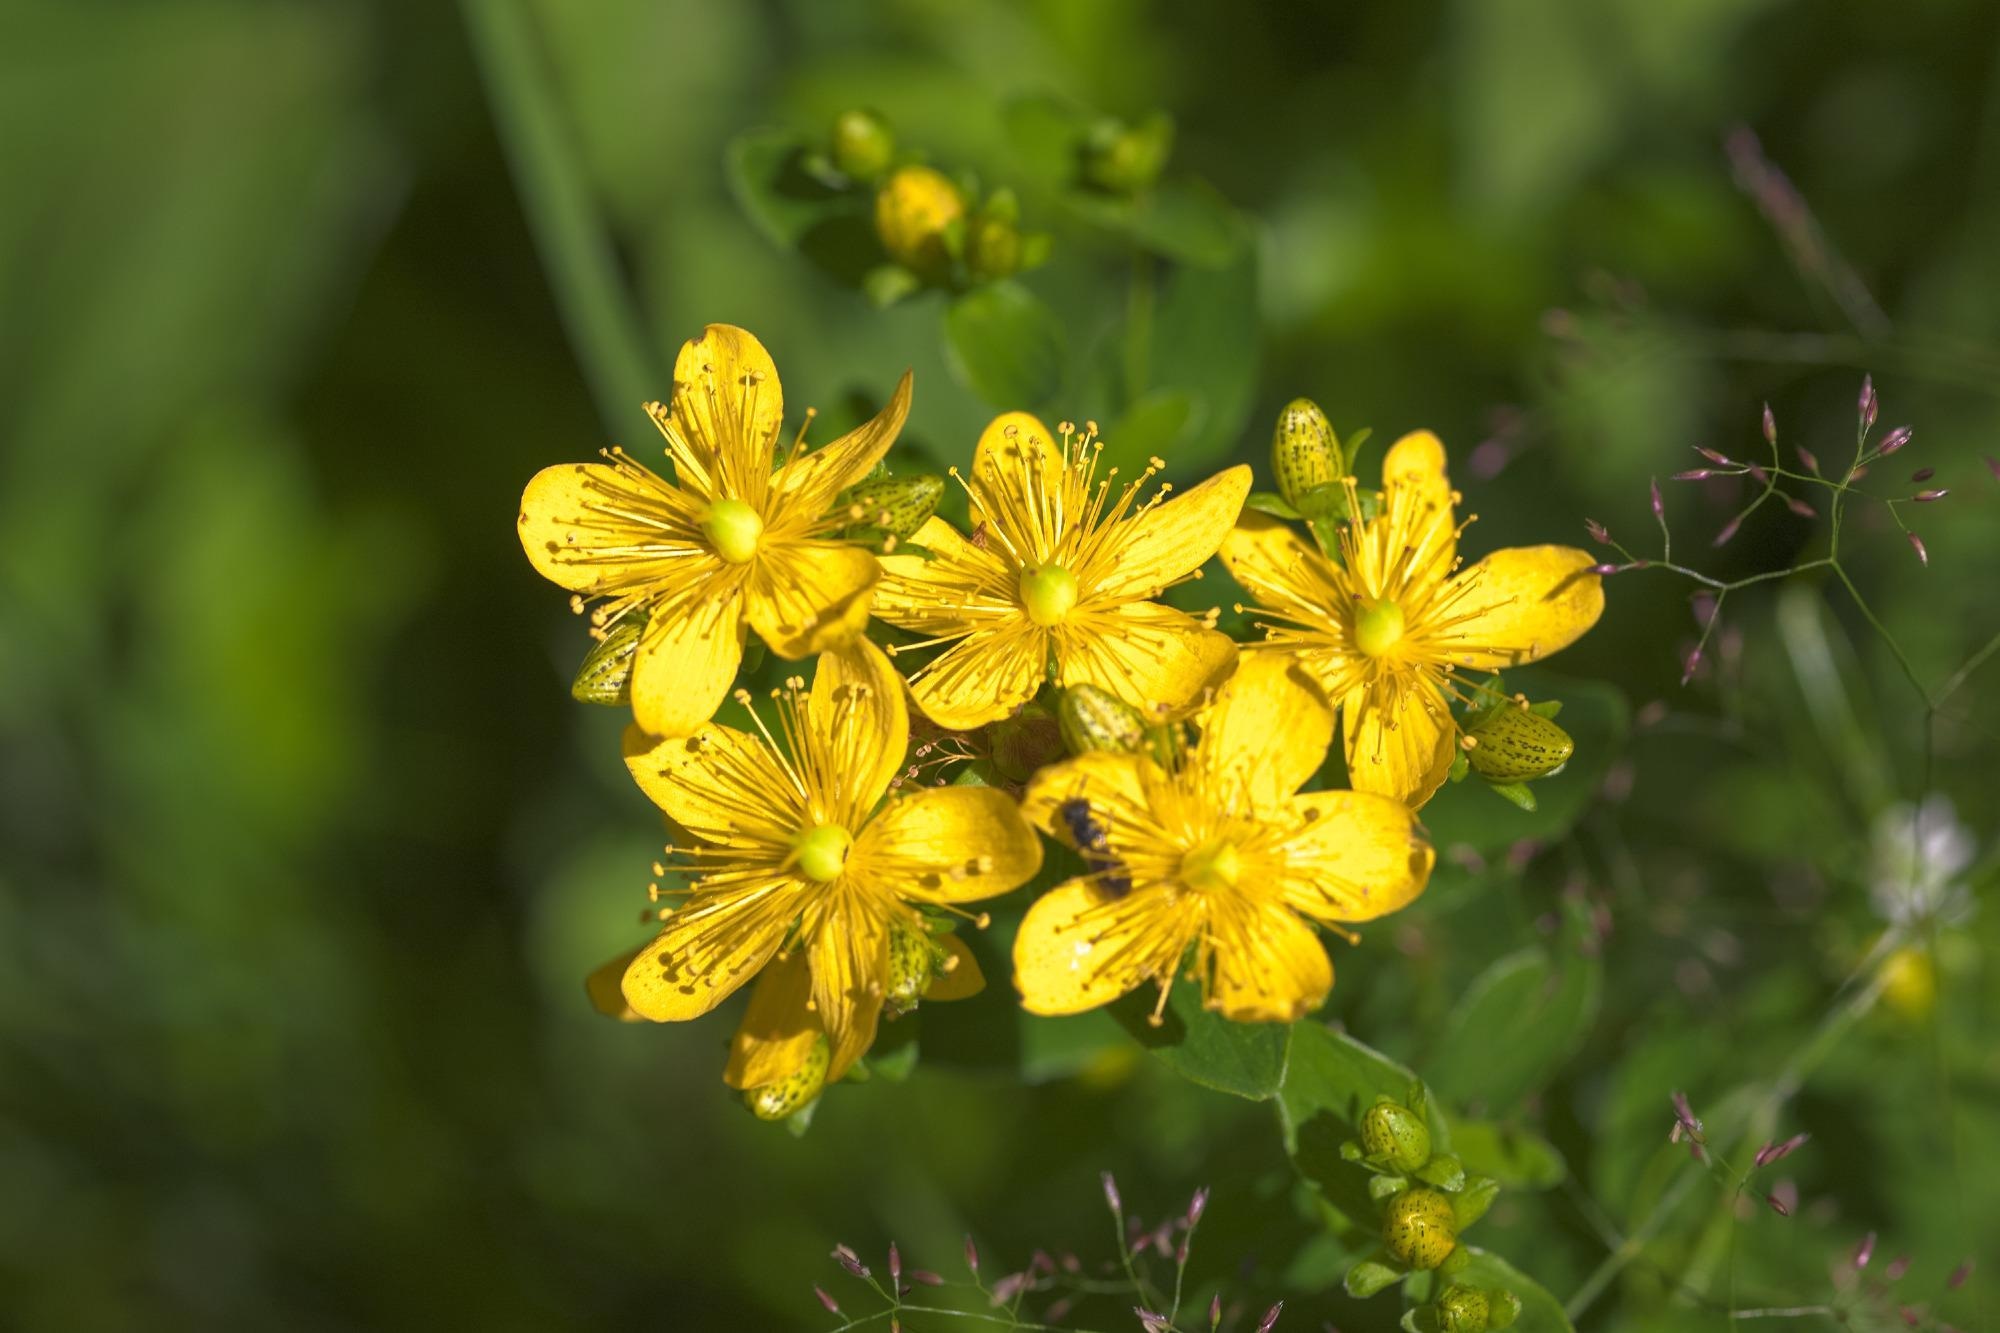 Study: Hypericum perforatum and Its Ingredients Hypericin and Pseudohypericin Demonstrate an Antiviral Activity against SARS-CoV-2. Image Credit: Maslov Dmitry / Shutterstock